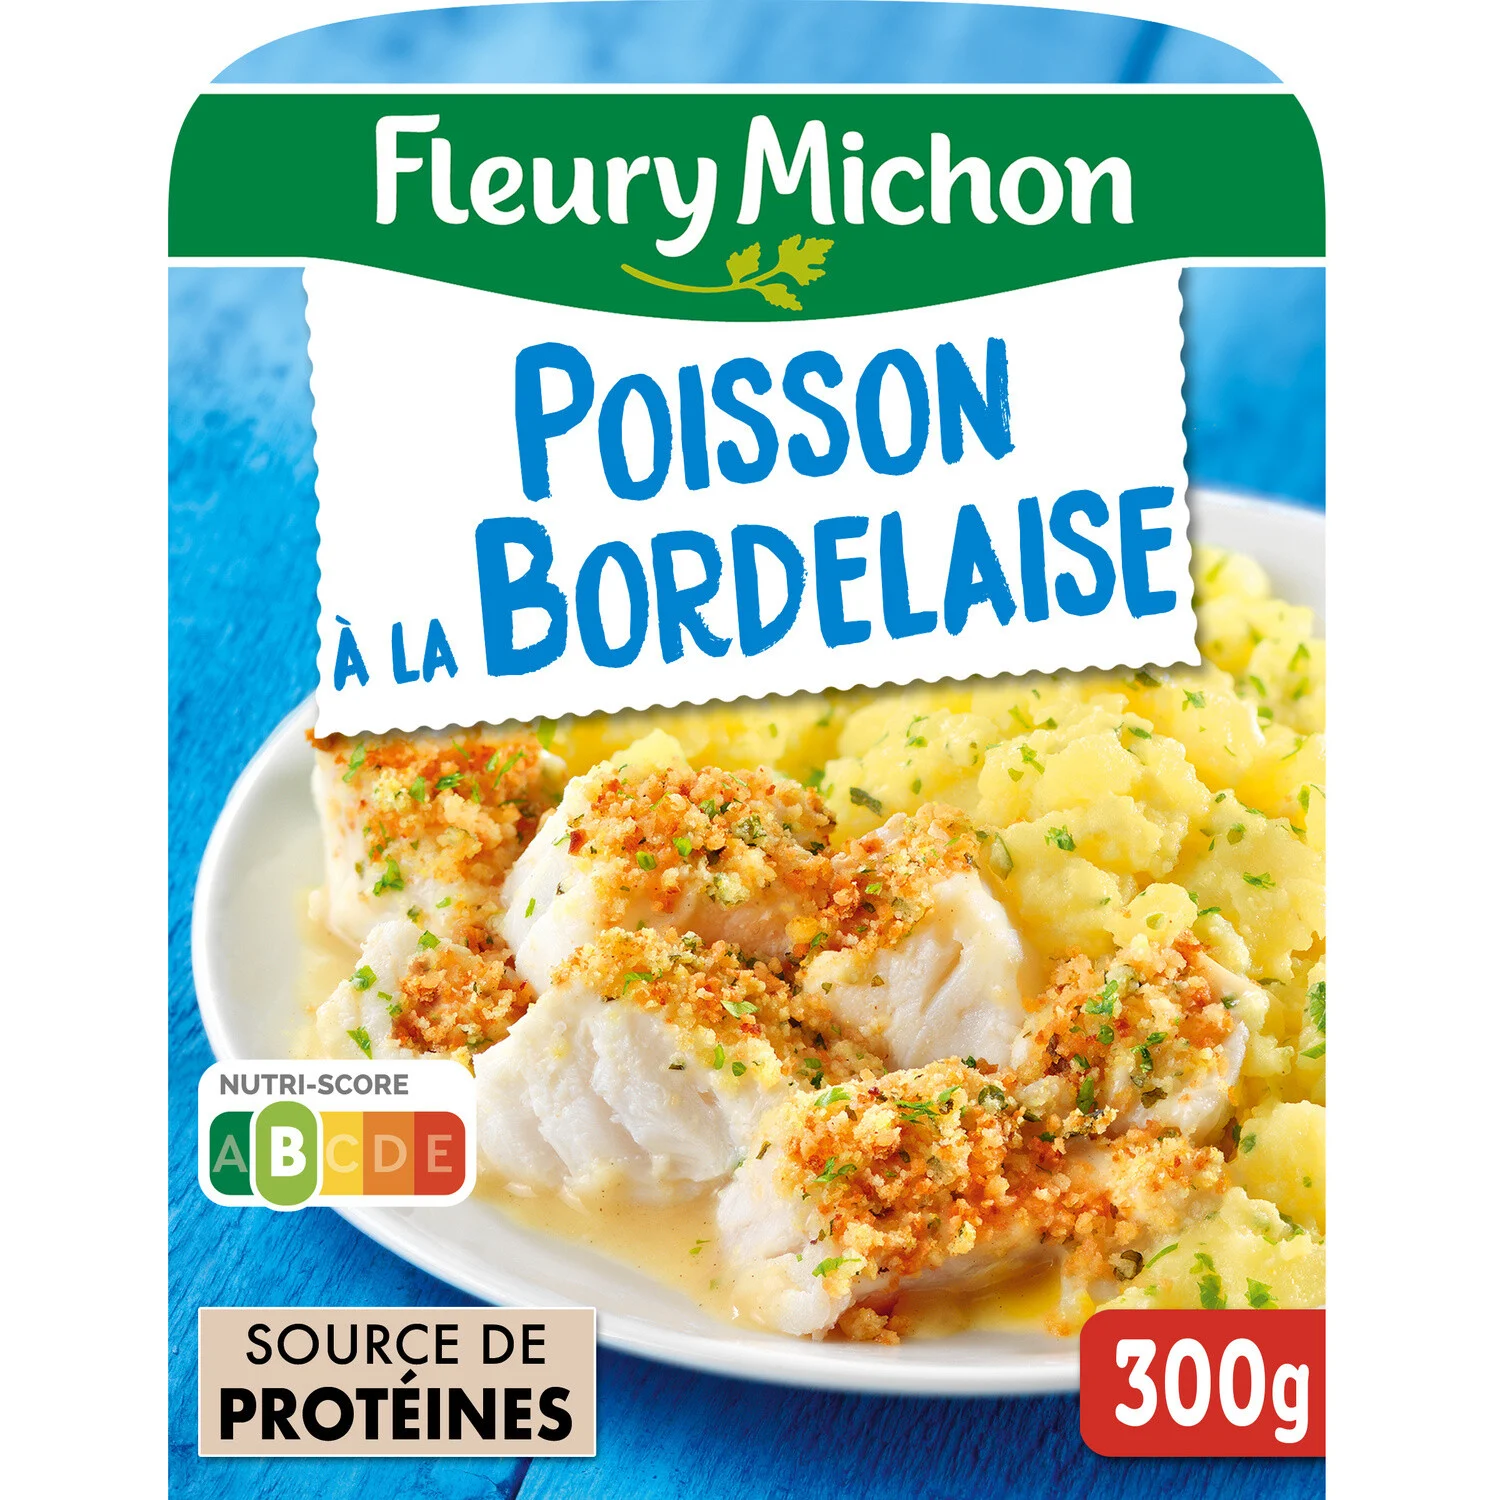 Fleury Michon Bordelaise style fish with crushed potatoes 300g